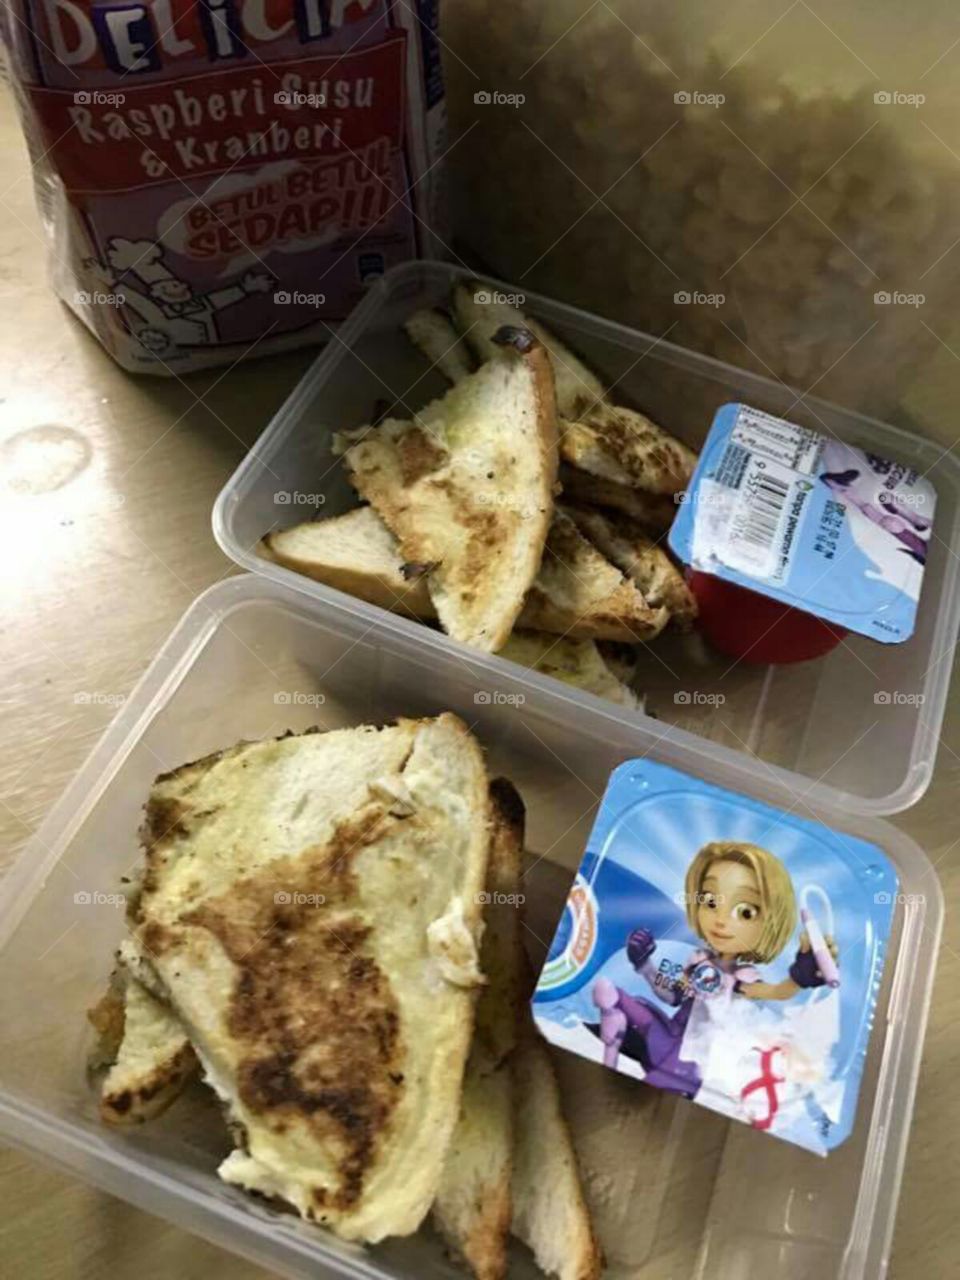 Lunch box to school.. #FoapSep18 #lunchbox #school #lunch #homemade